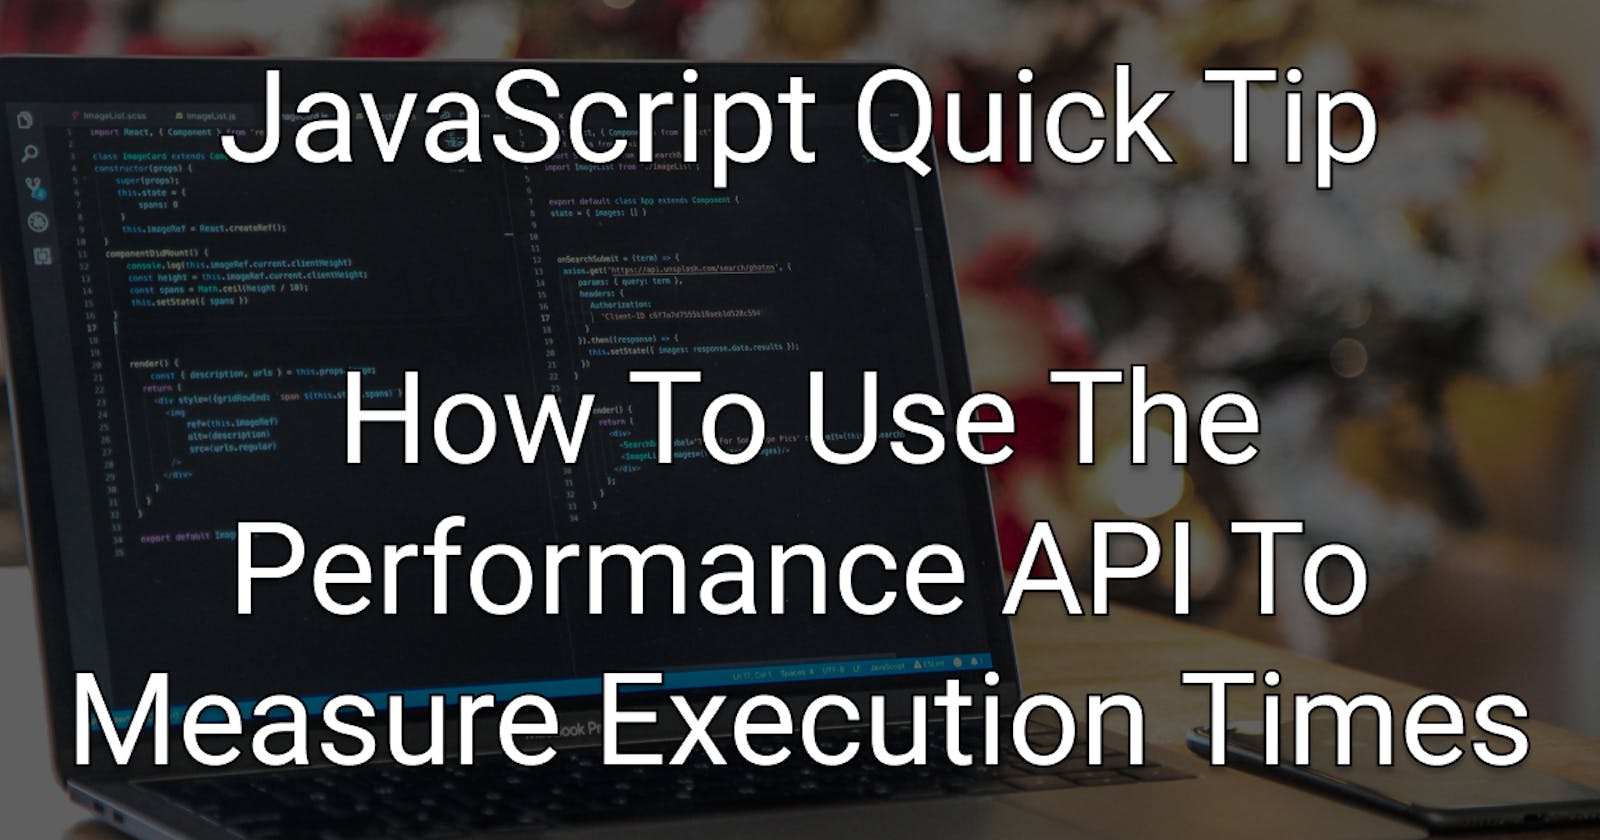 JavaScript Quick Tip: How To Use The Performance API To Measure Execution Times